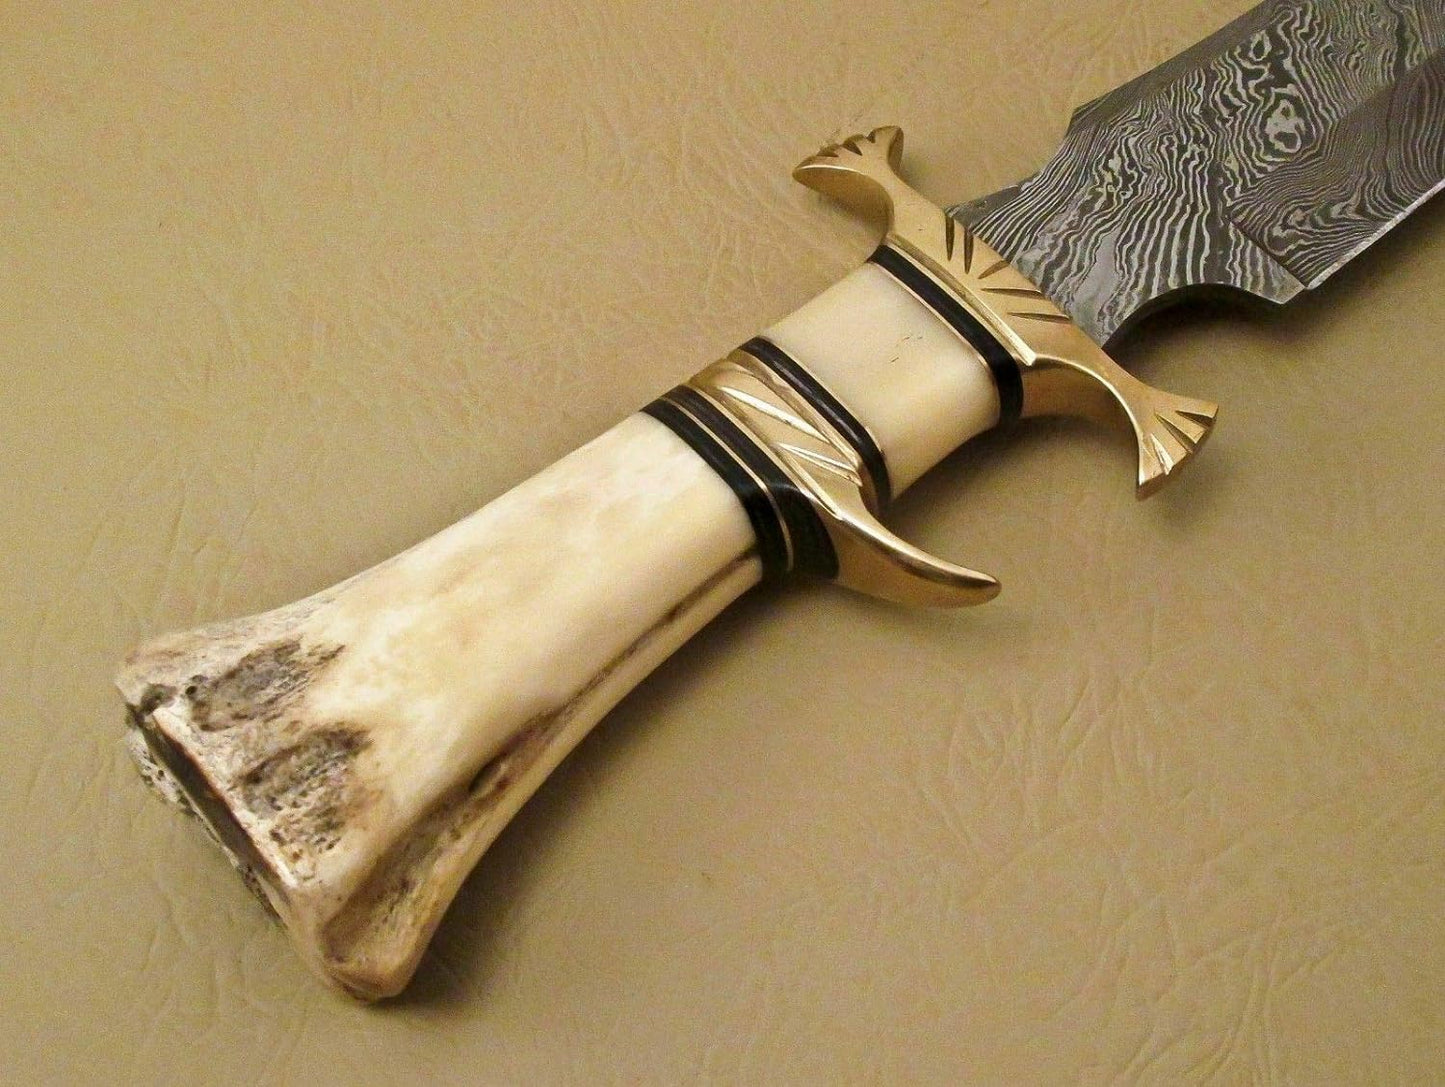 KD Damascus Hunting Knife Firm Grip Handle Made of Camel Bone with Sheath